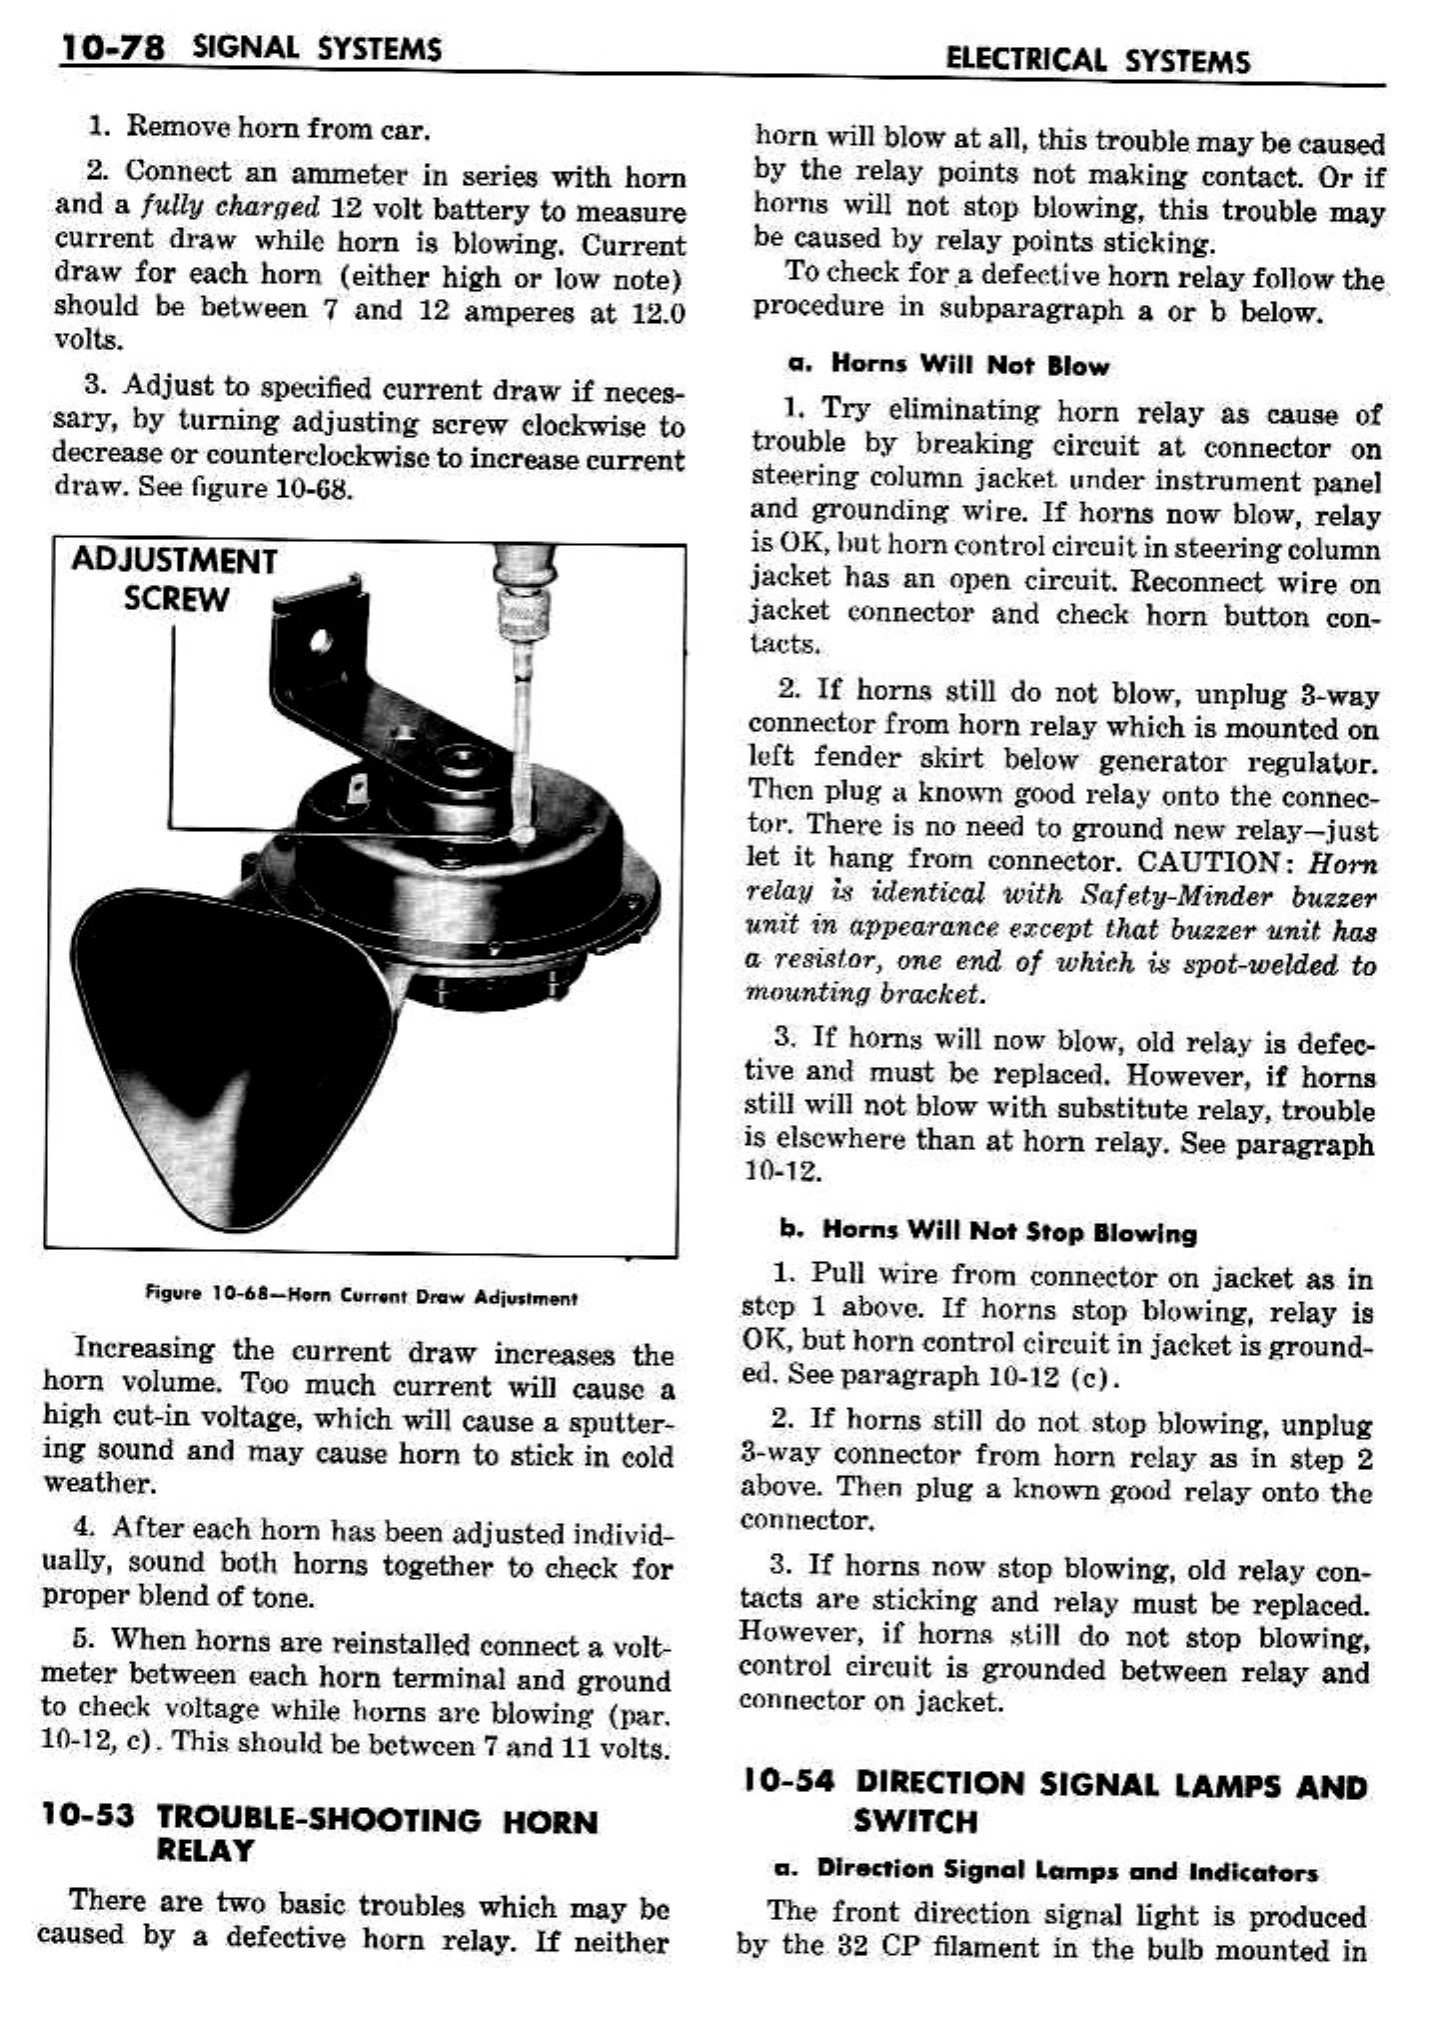 n_11 1958 Buick Shop Manual - Electrical Systems_78.jpg